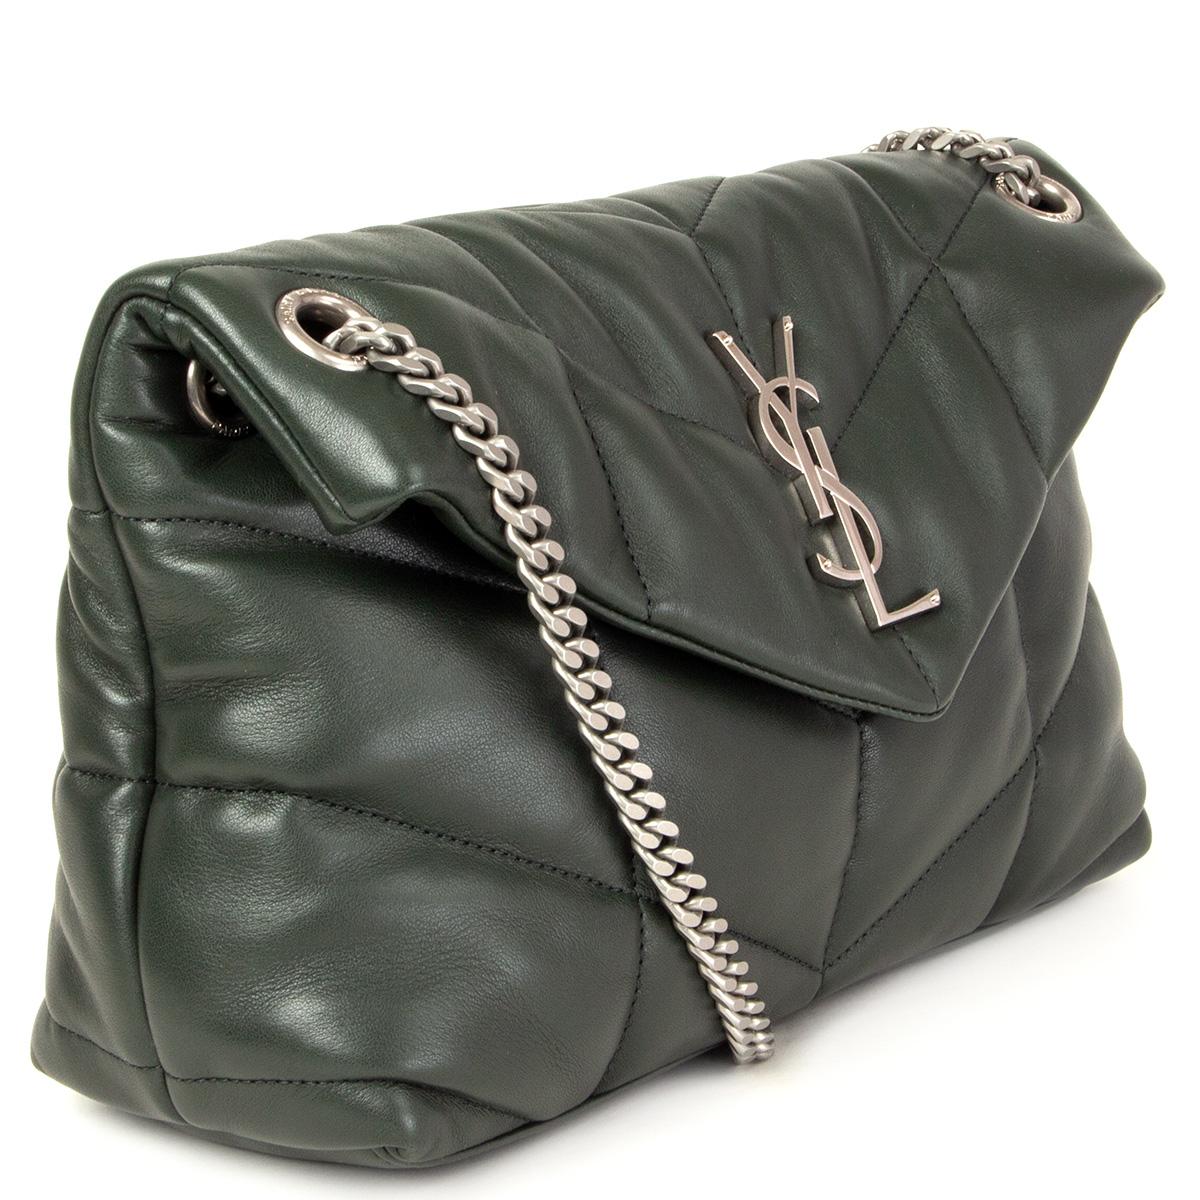 100% authentic Saint Laurent Small Puffer shoulder bag in moss green quilted lambskin featuring silver-tone YSL initials and chain strap. Opens with a magnetic snap fastening and is lined in black grosgrain fabric with one zipper pocket against the